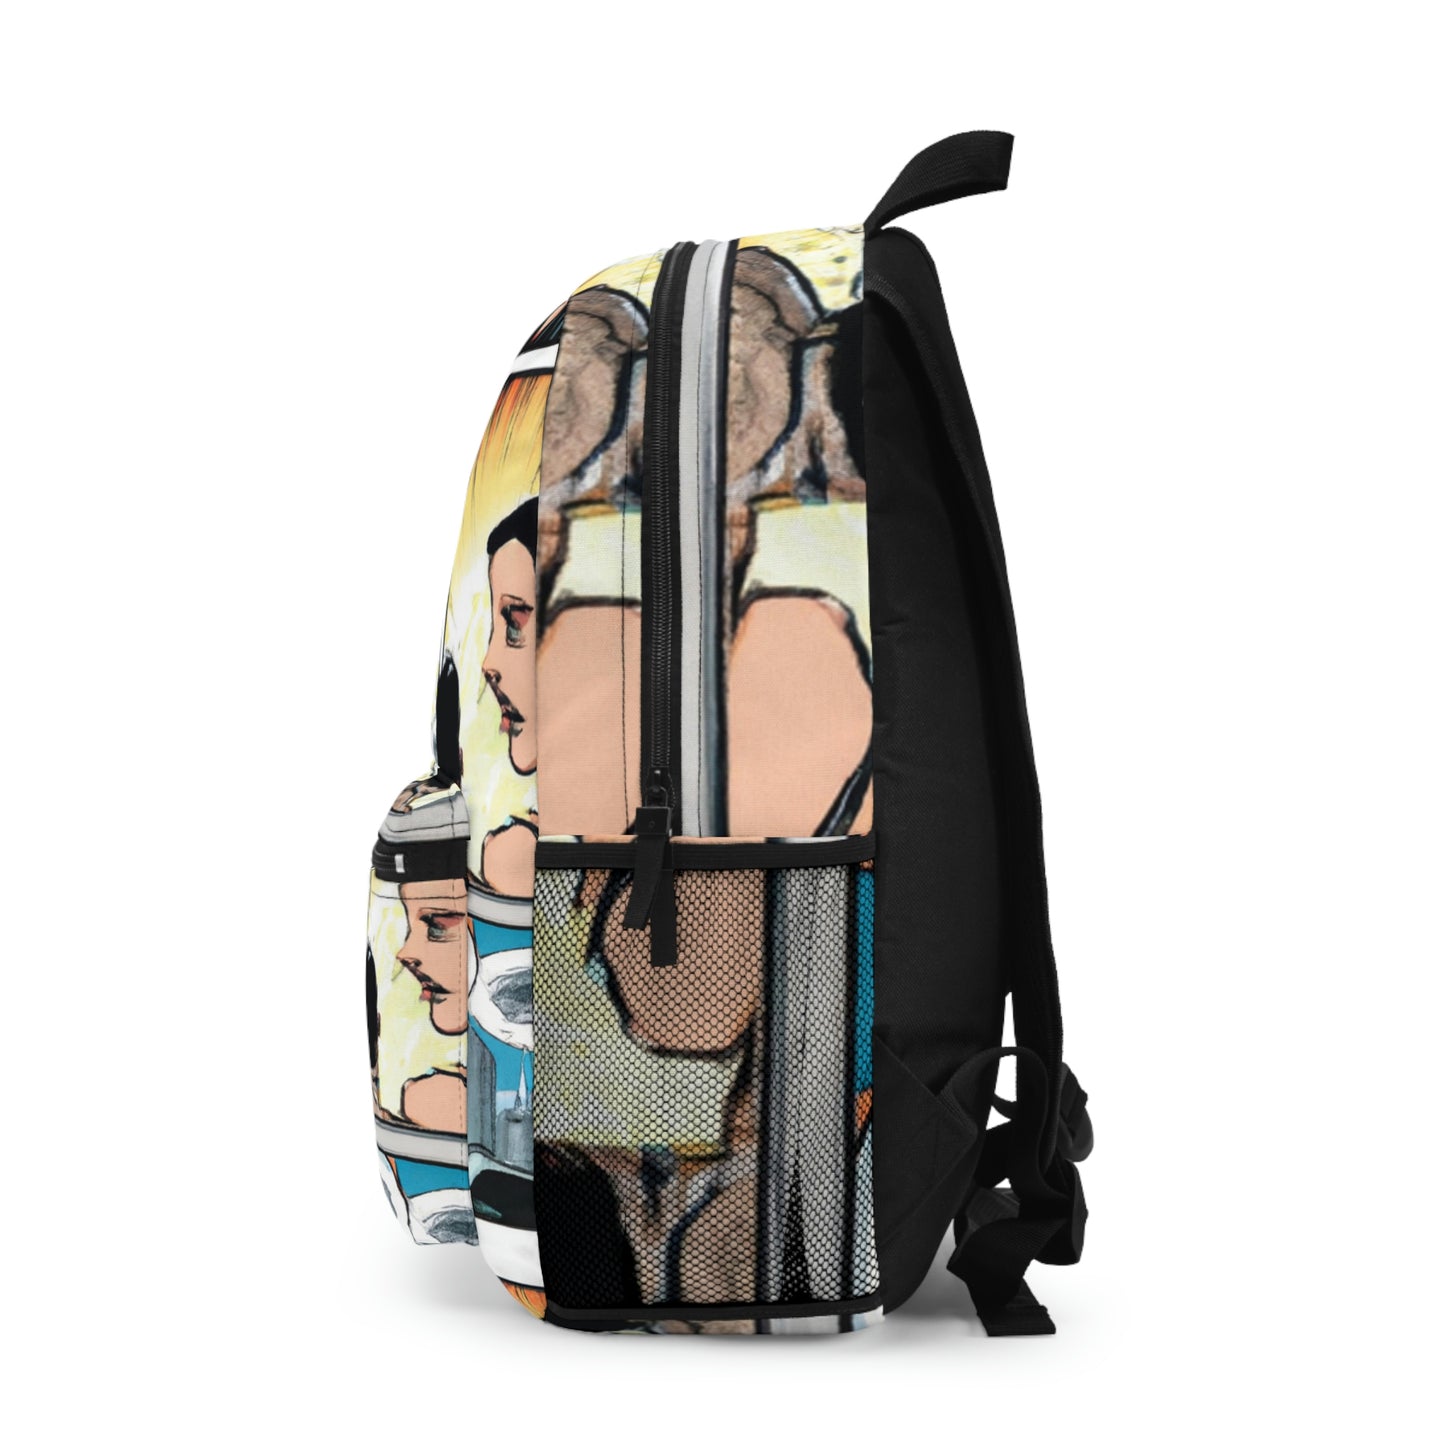 Cyberstorme the Techno-Wizard - Comic Book Backpack